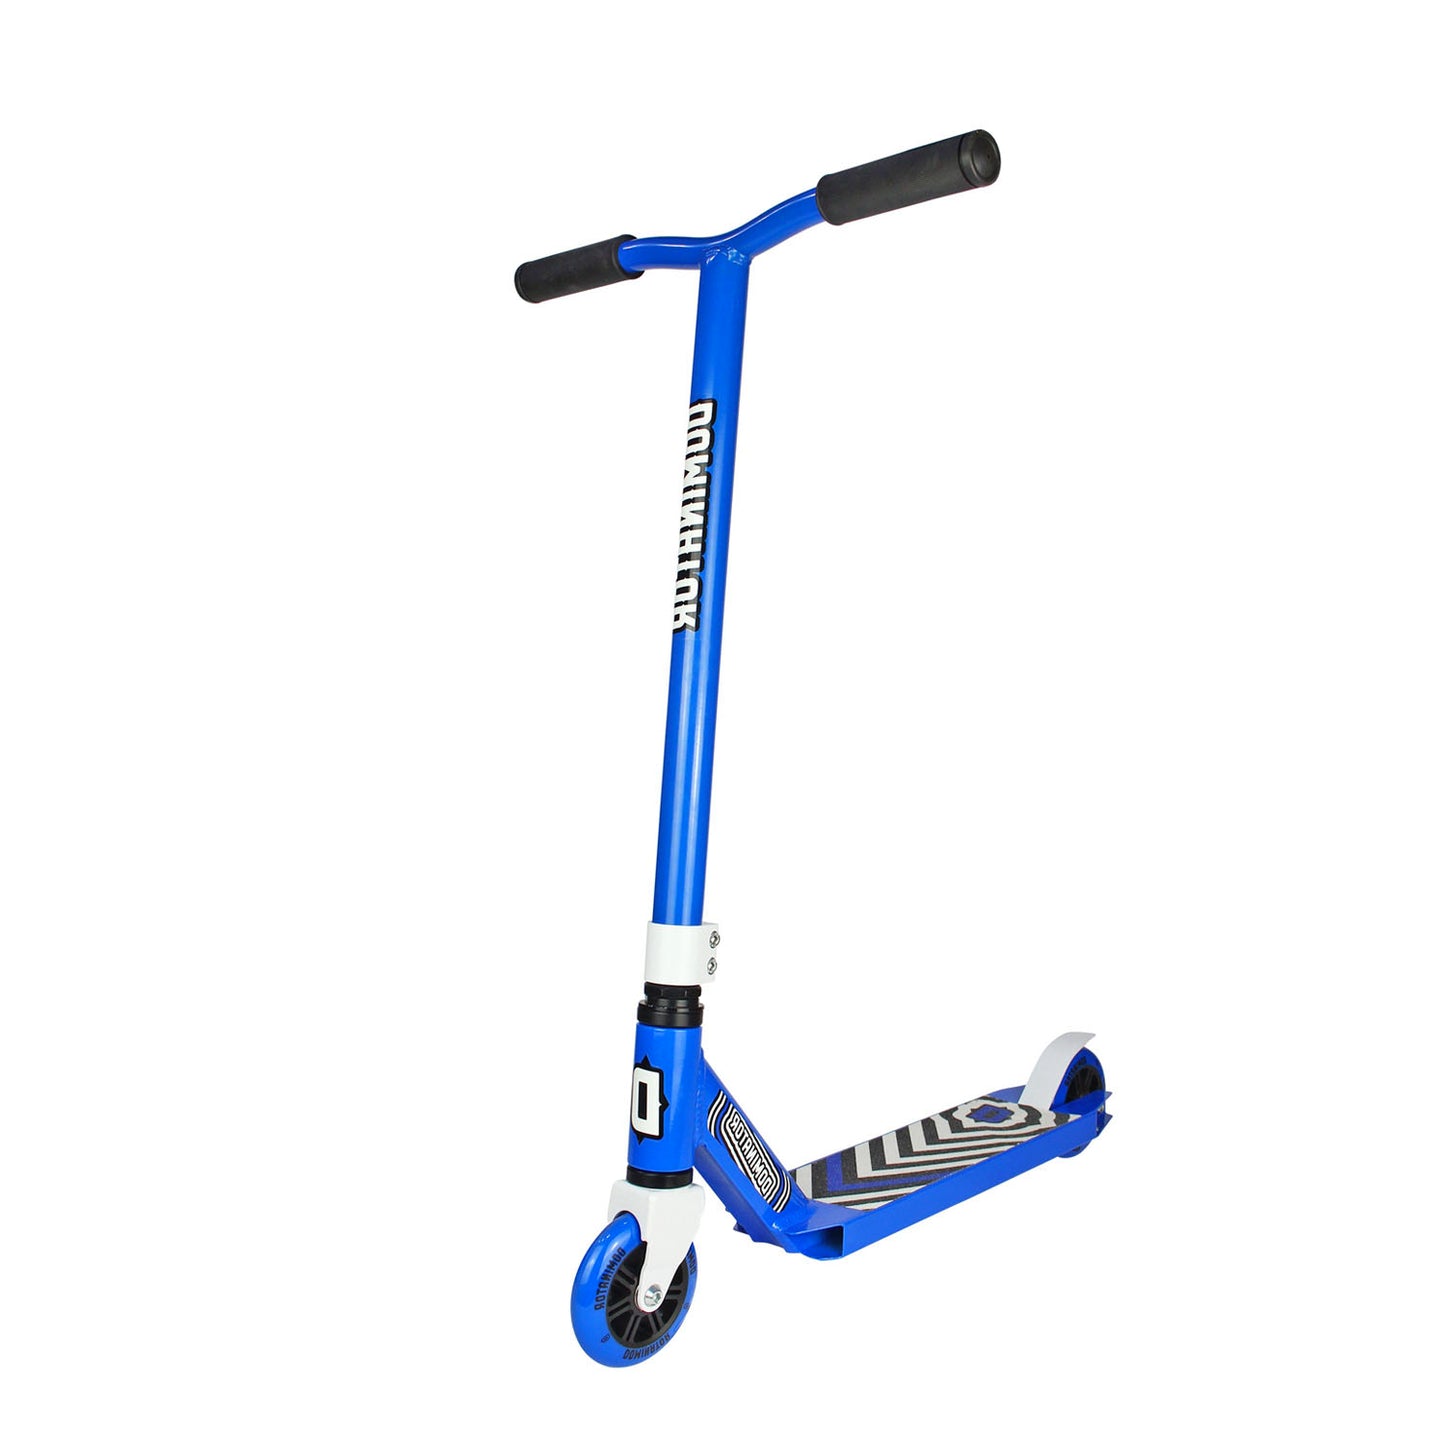 Dominator Scout Complete Scooter - Blue / Blue - Prime Delux Store